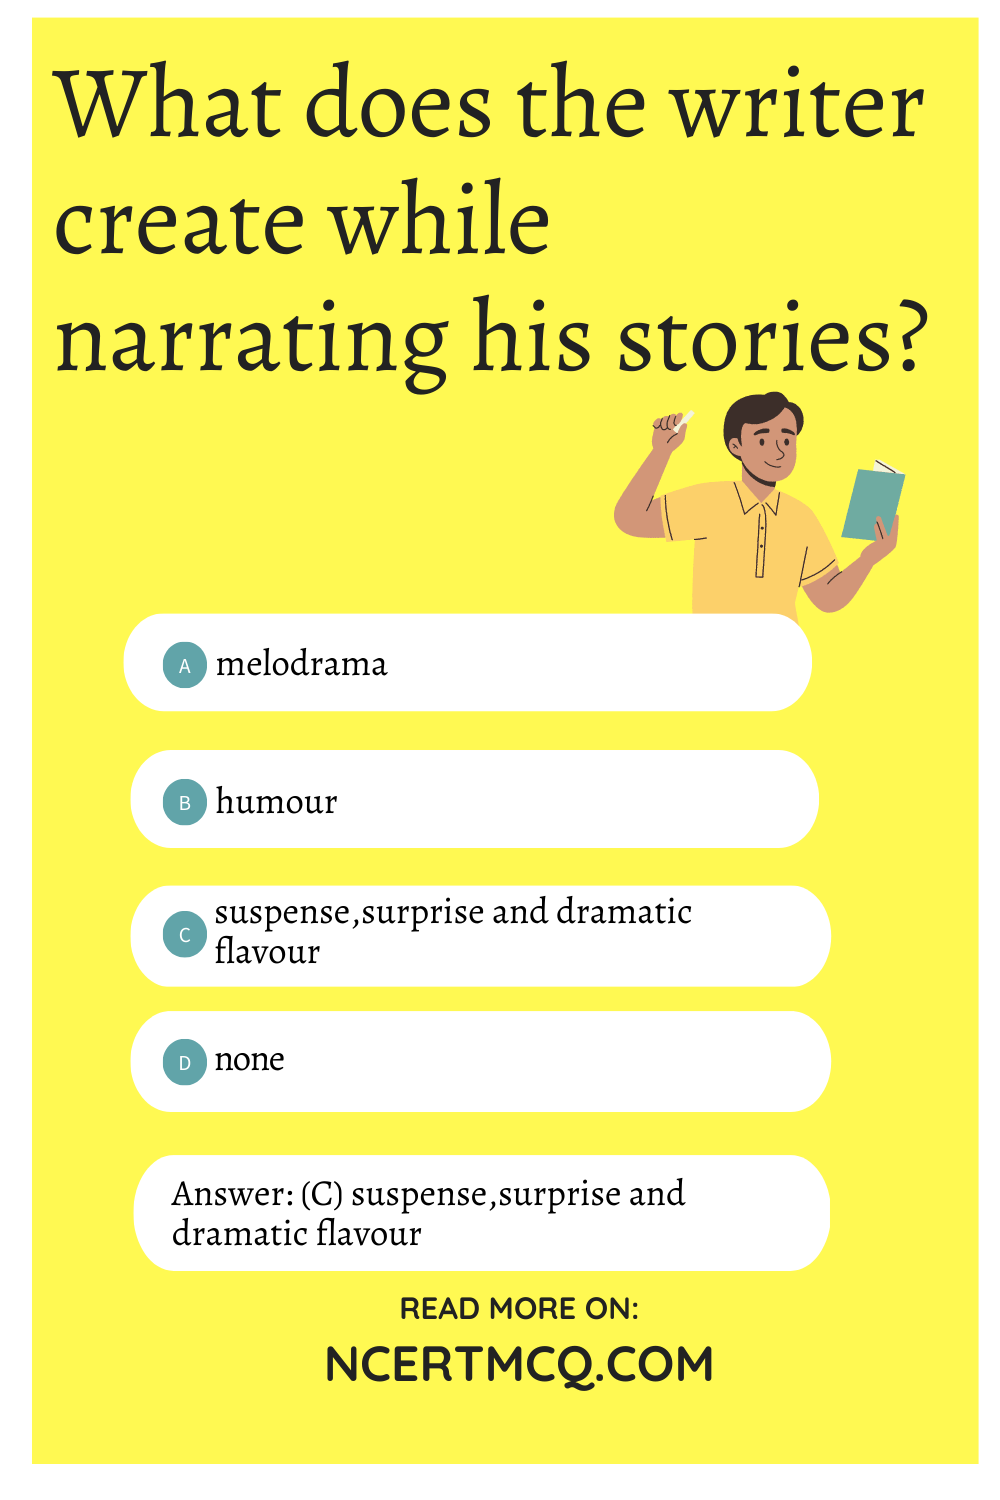 What does the writer create while narrating his stories?